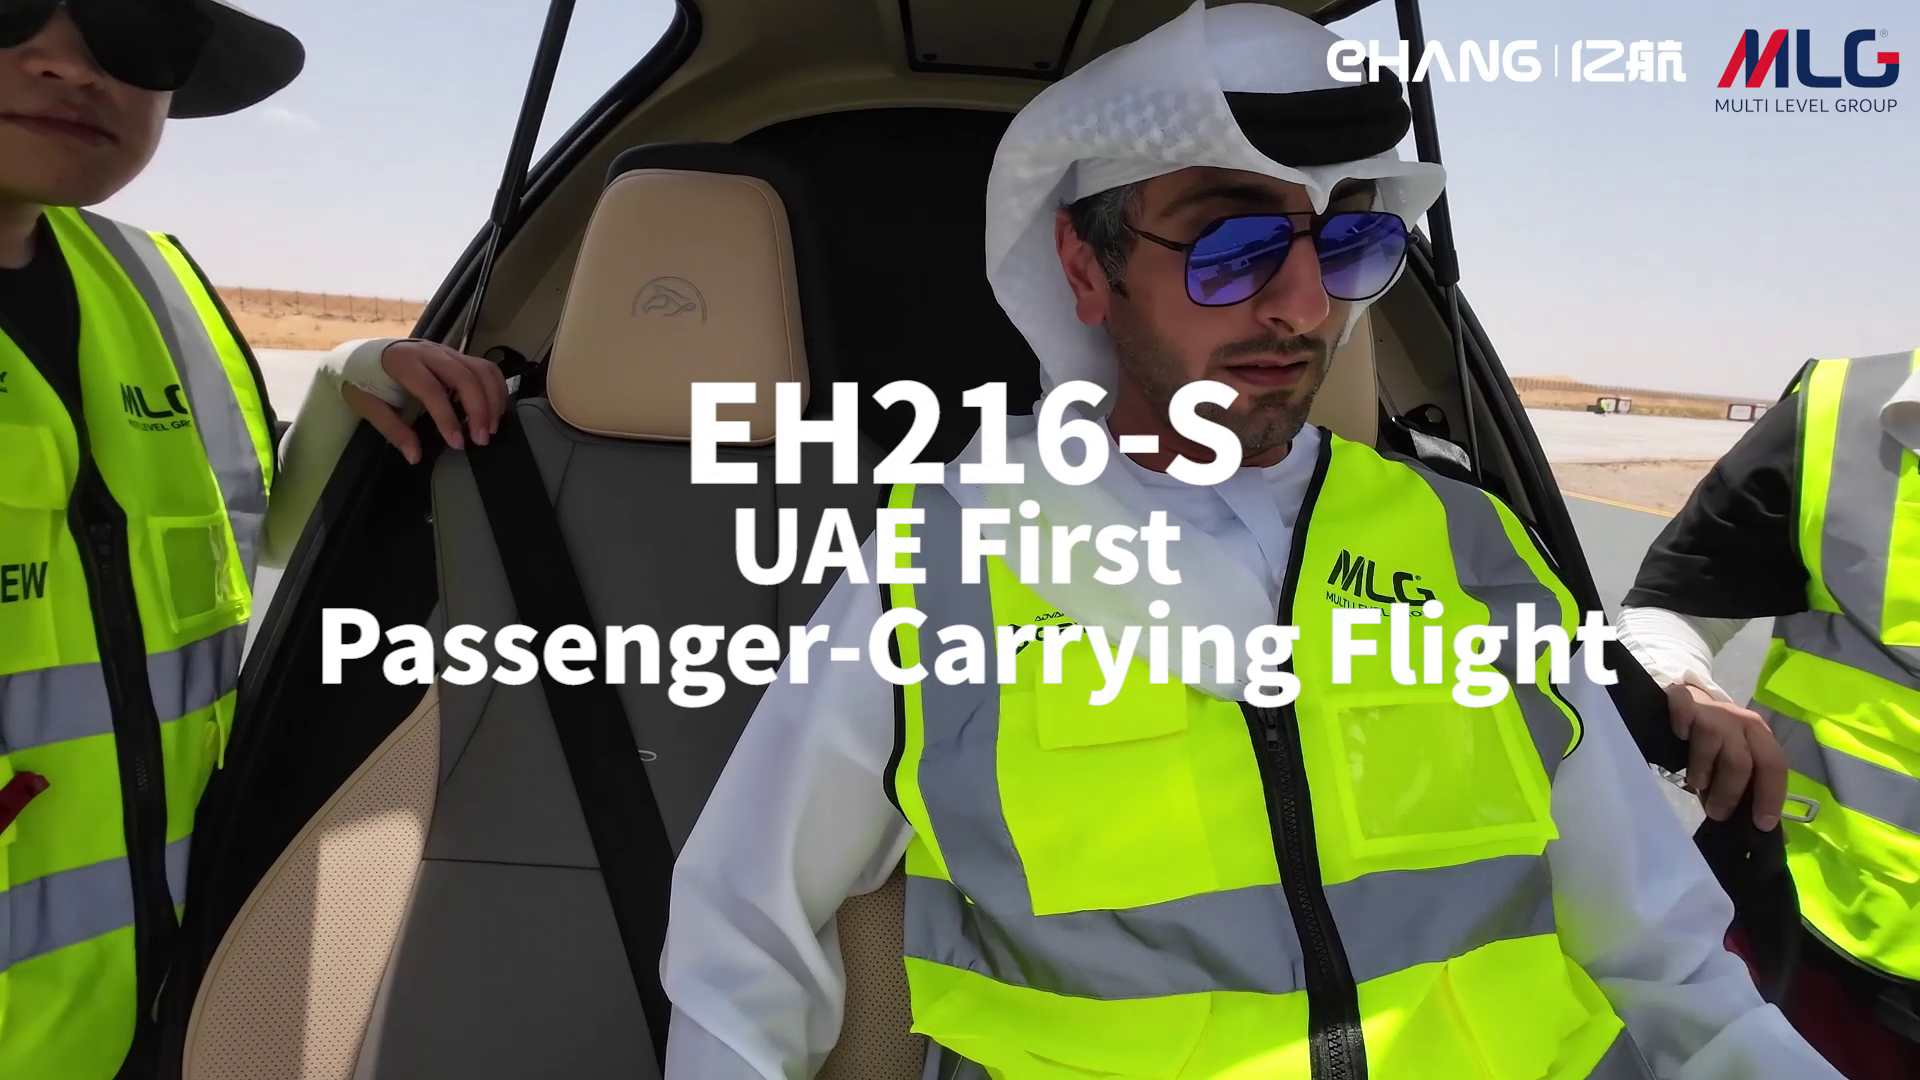 EH216-S Completes UAE’s First Passenger-Carrying Flight